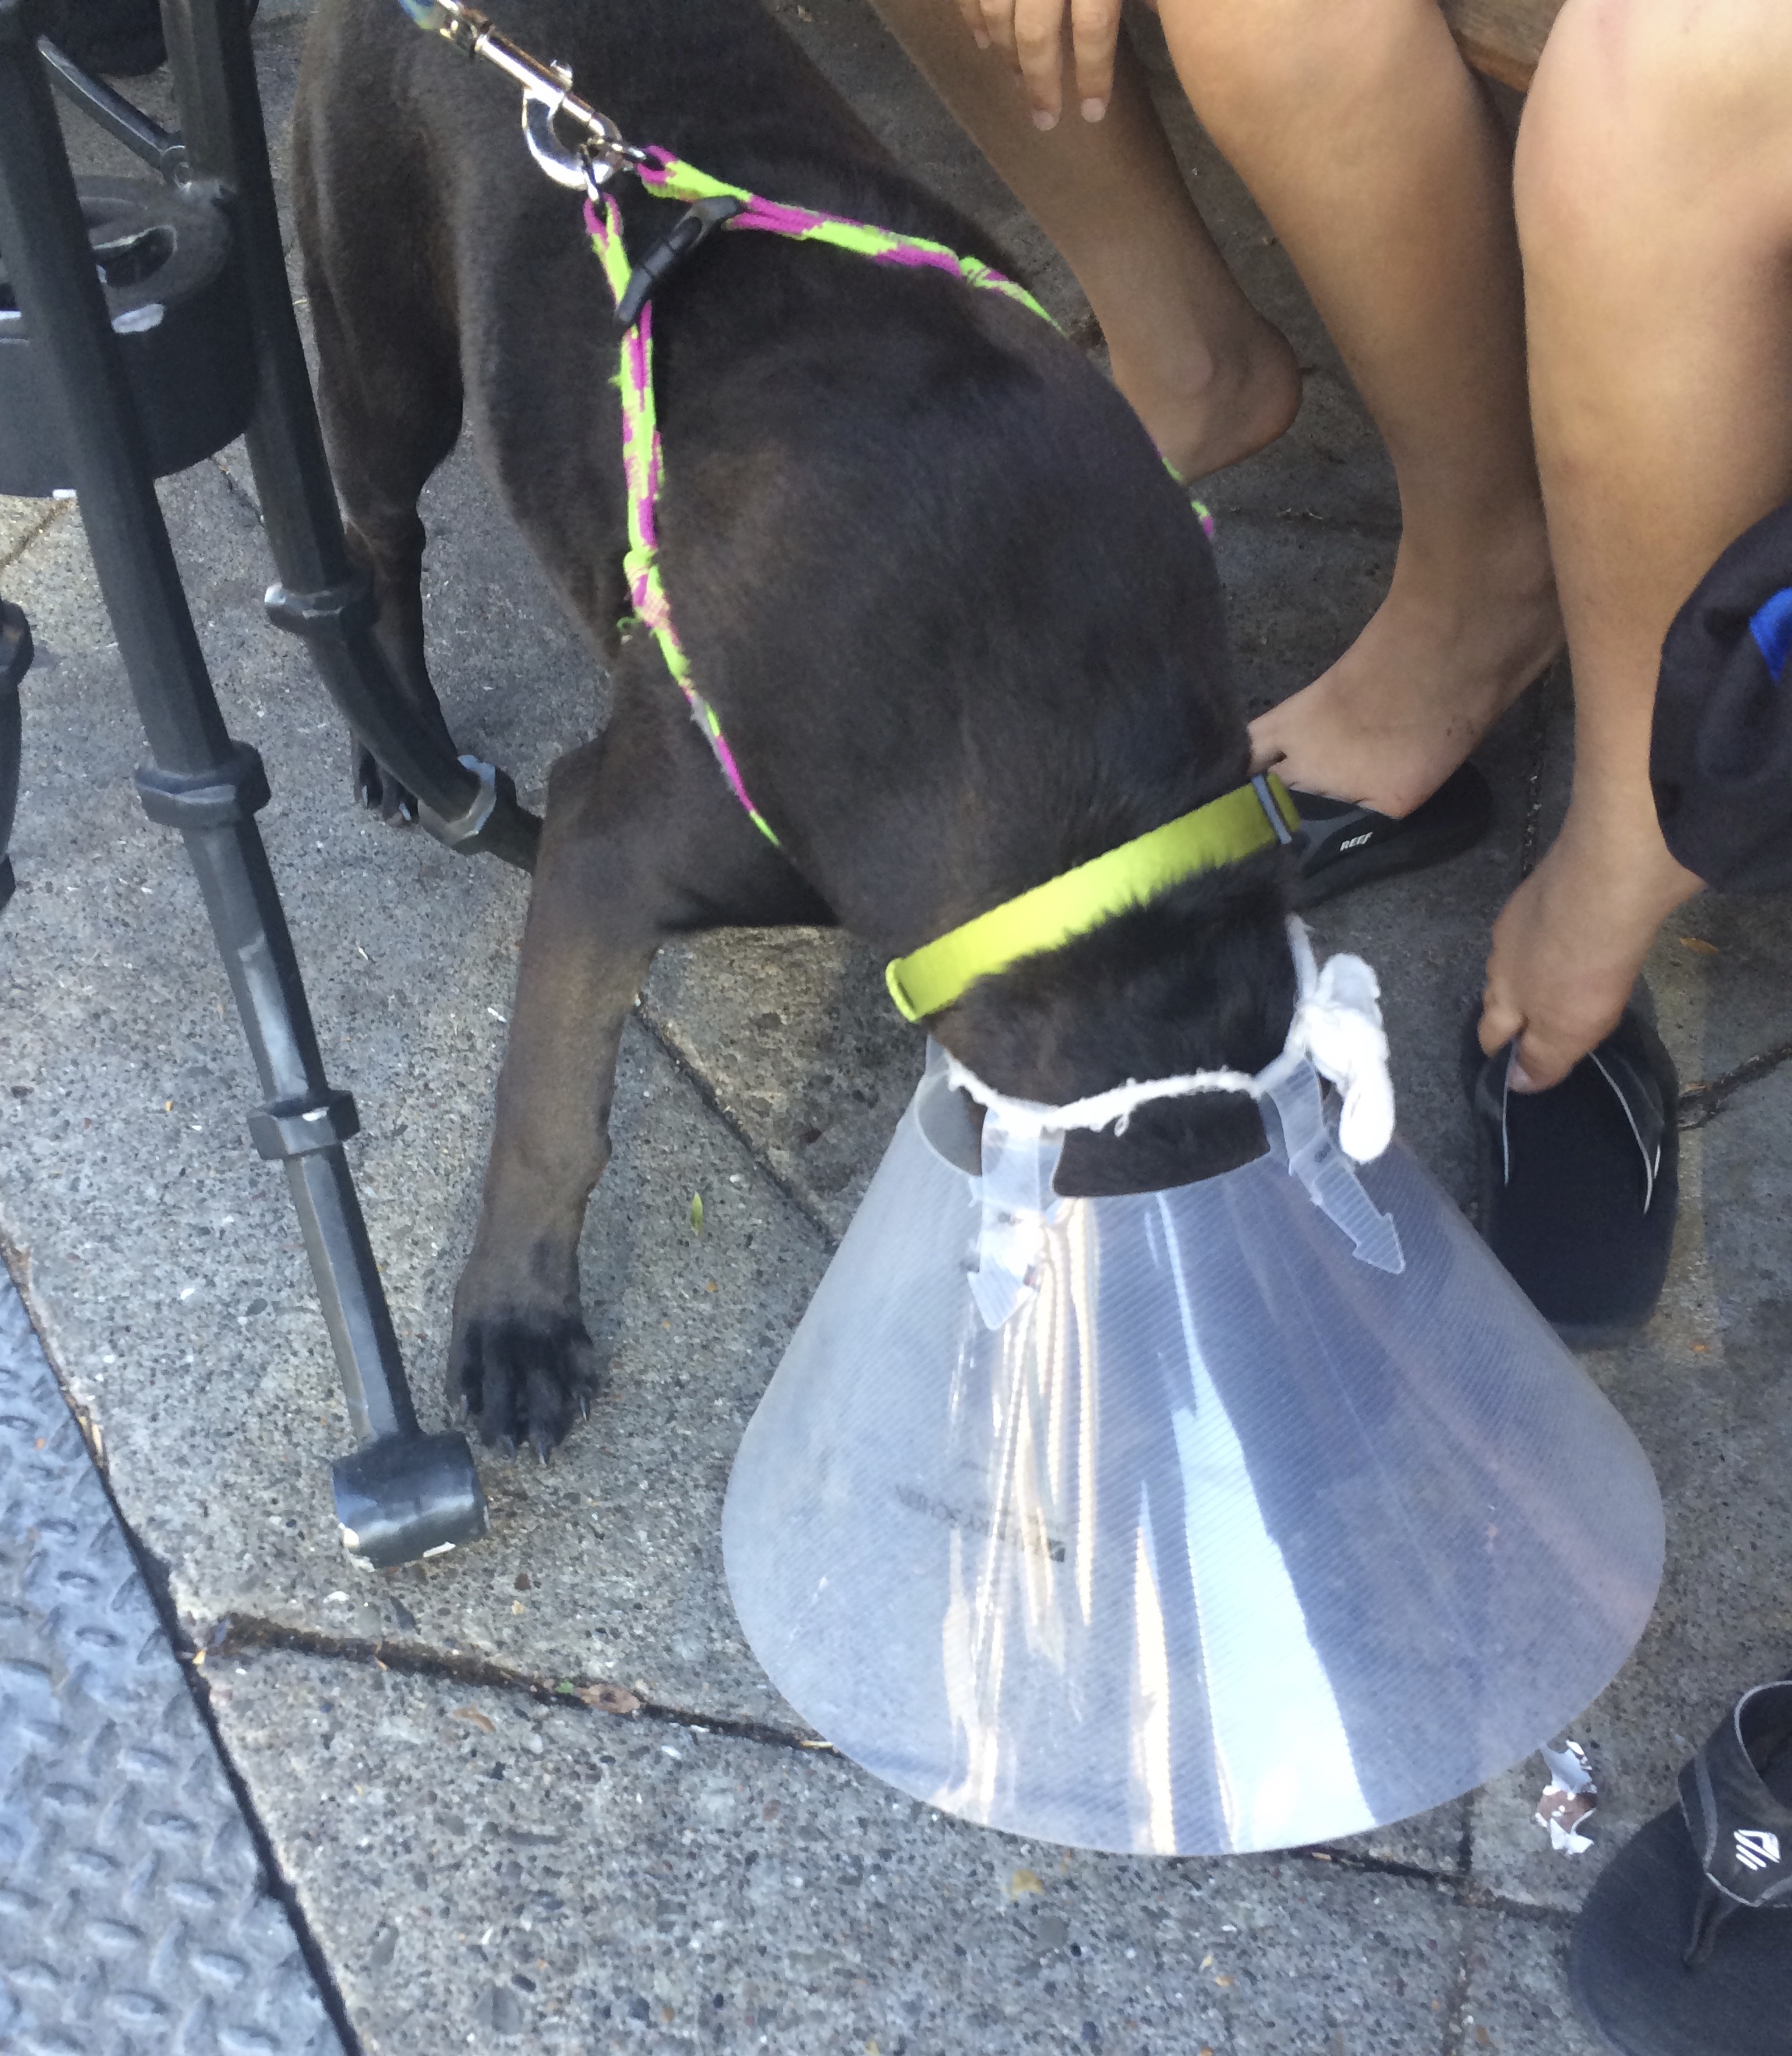 Lab Mix Puppy With Cone Of Shame Eating Something Off The Ground